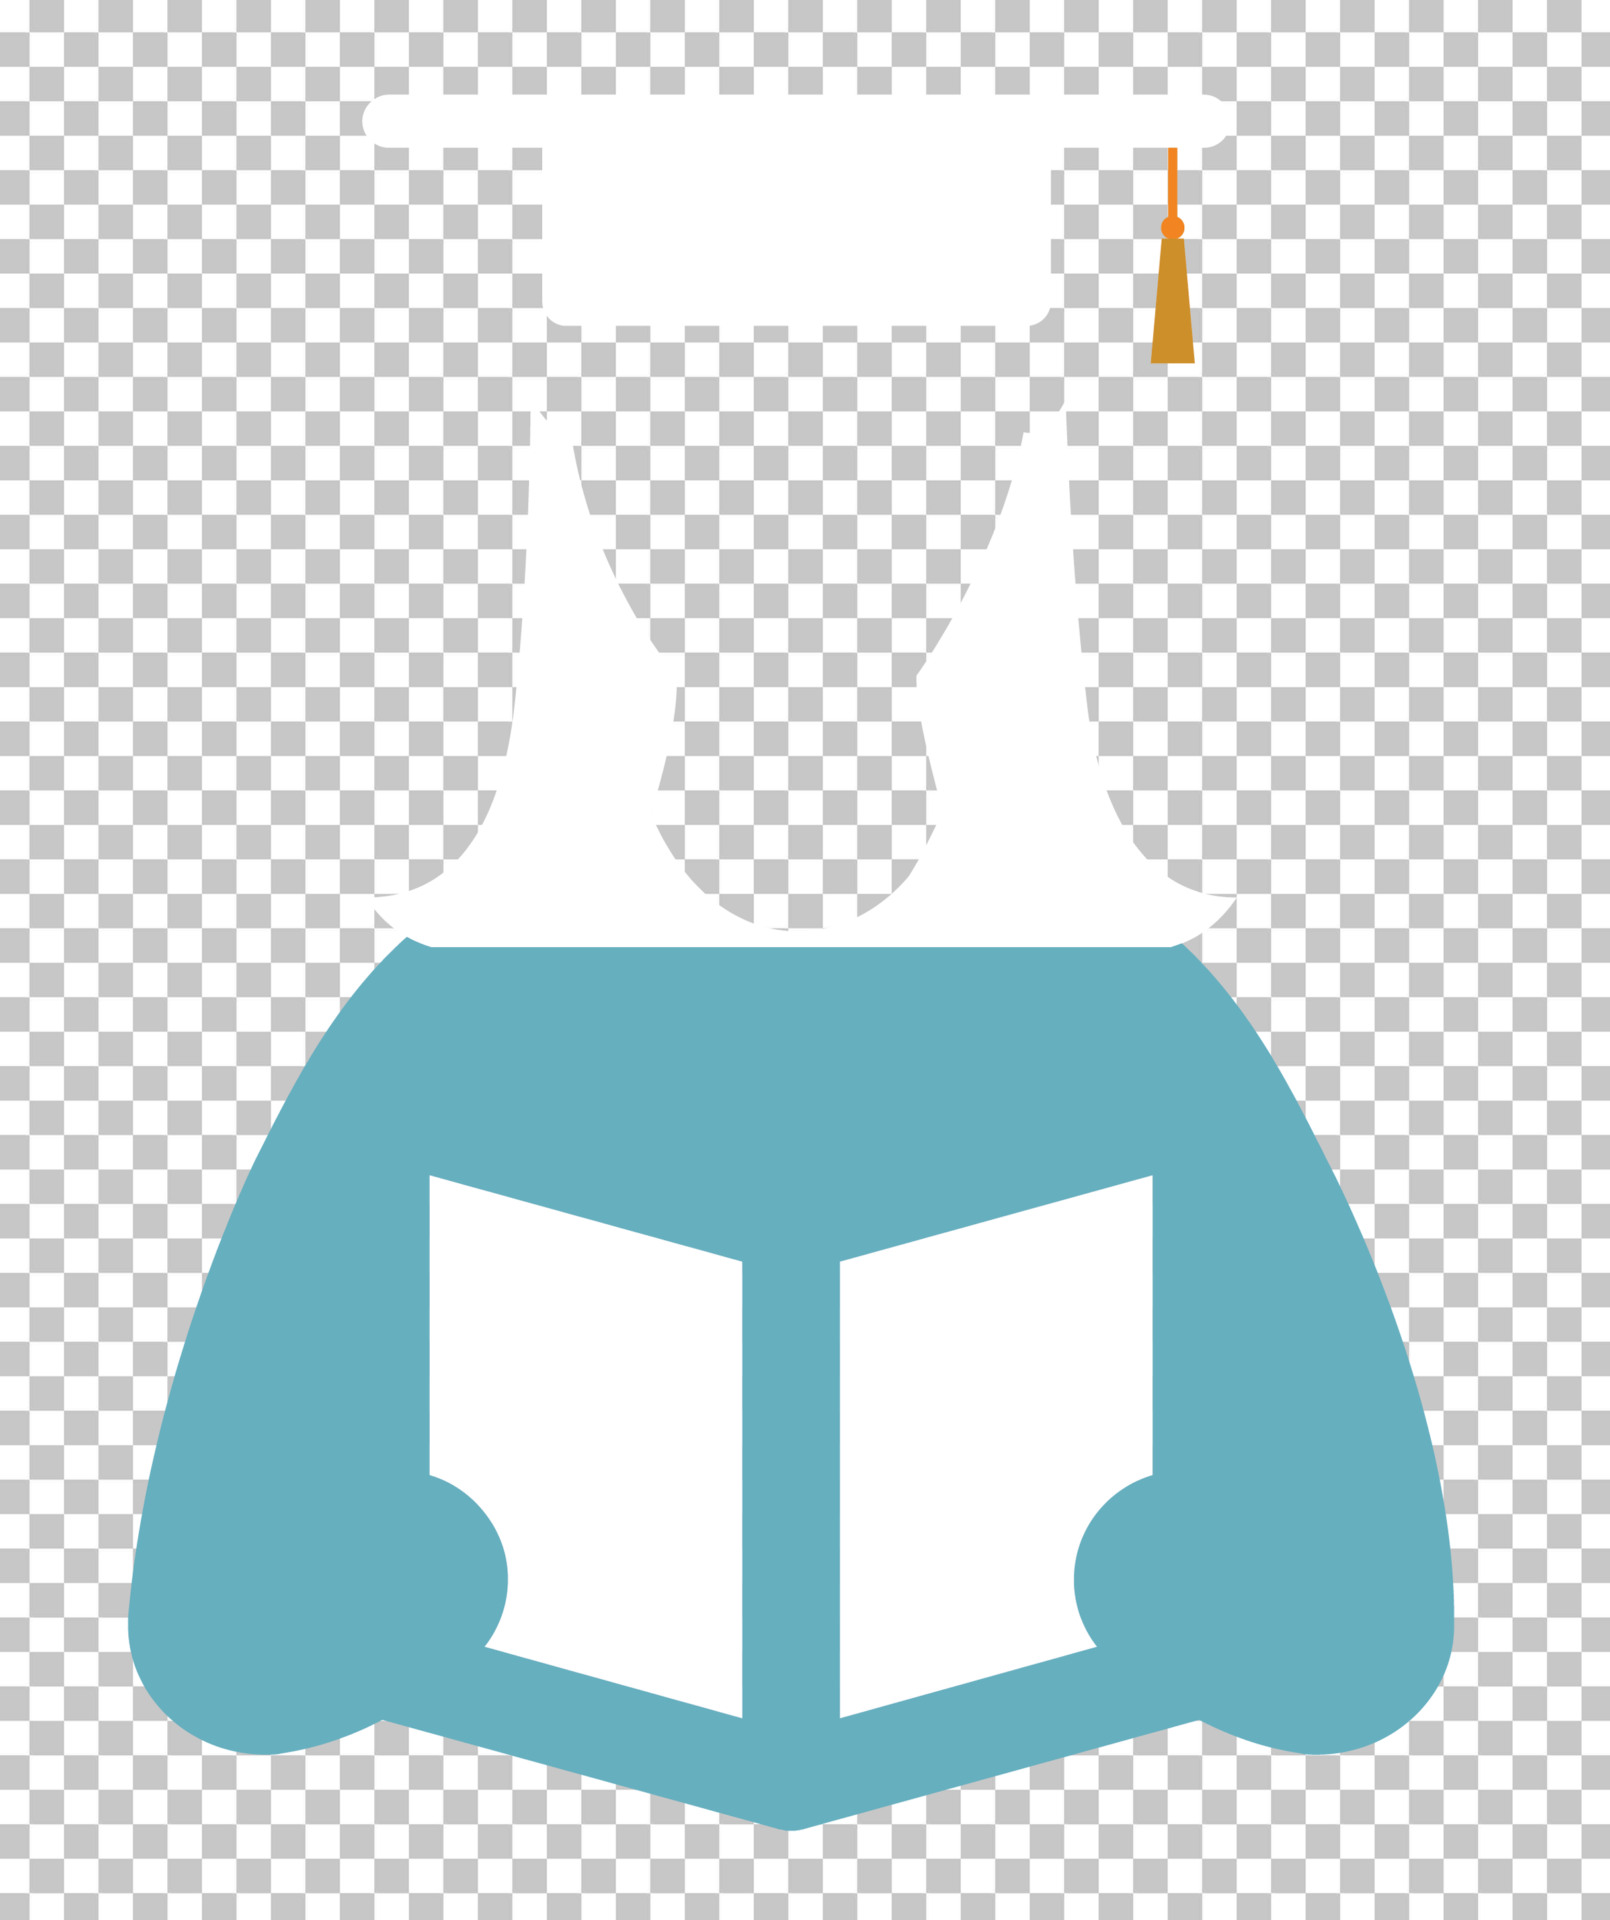 Student in Graduation Cap Reading Book PNG Image